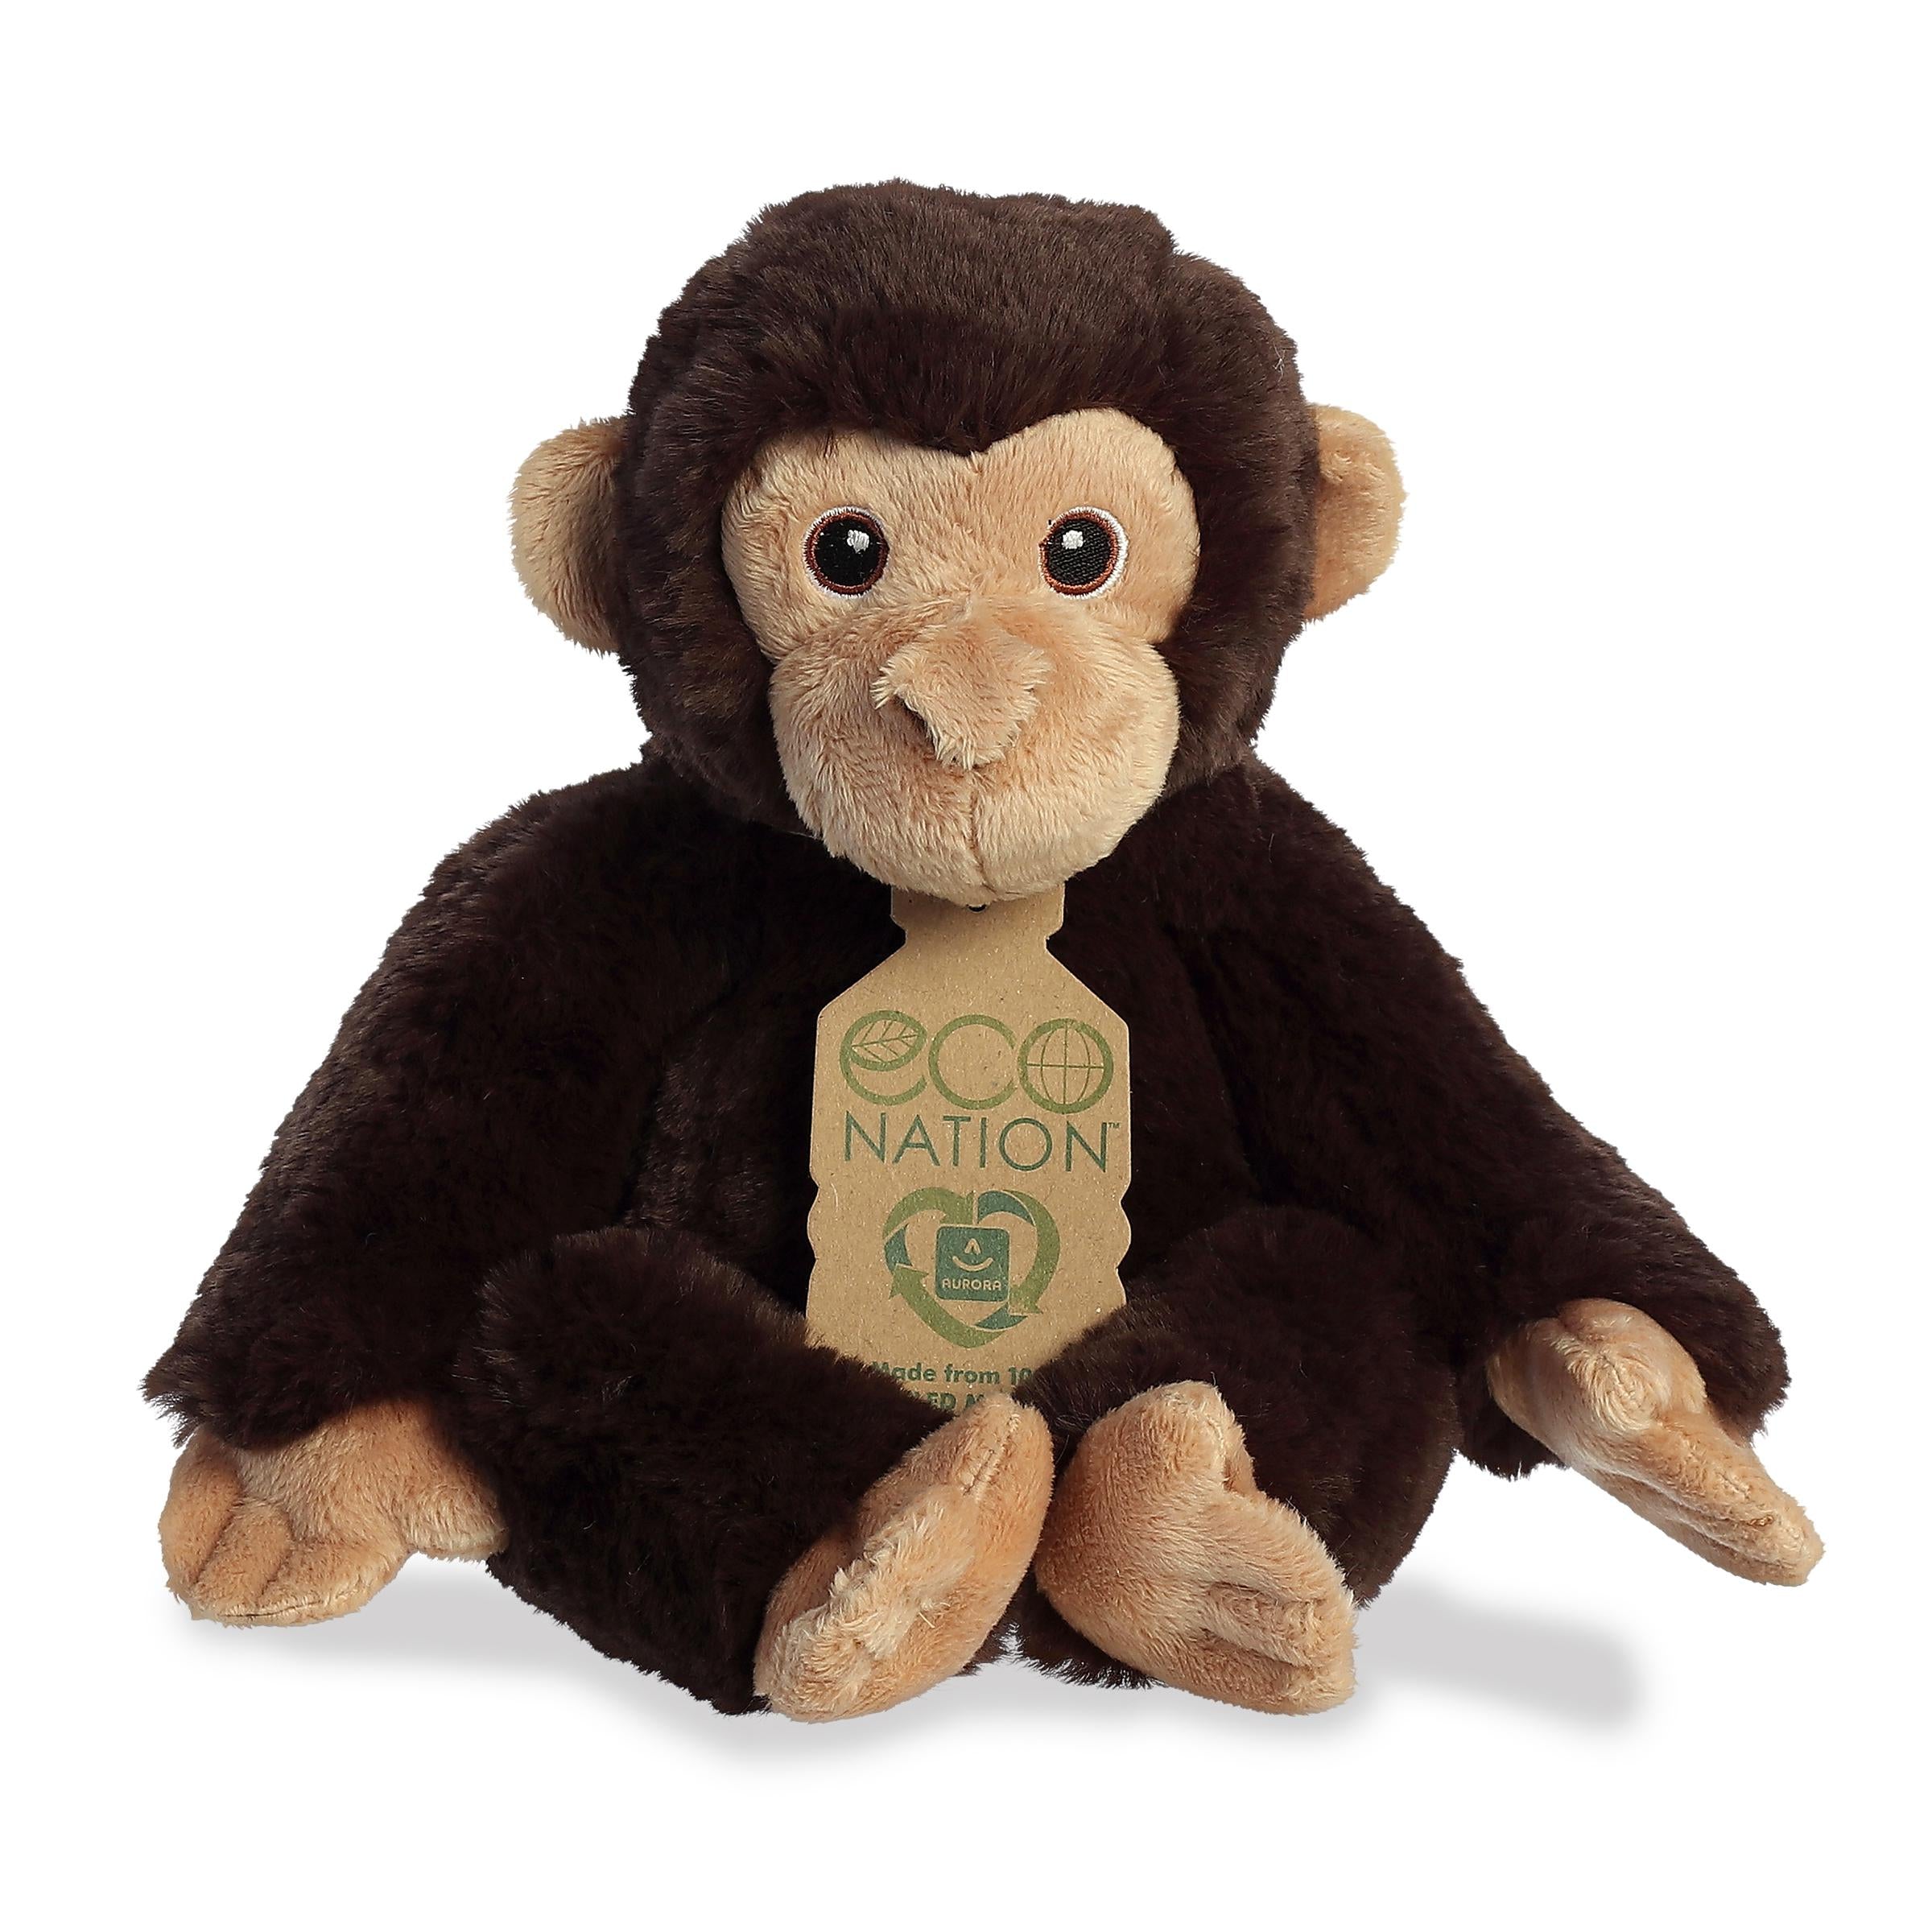 A sweet chimpanzee plush with rich brown fur, gently embroidered eyes, and an eco-nation tag its neck